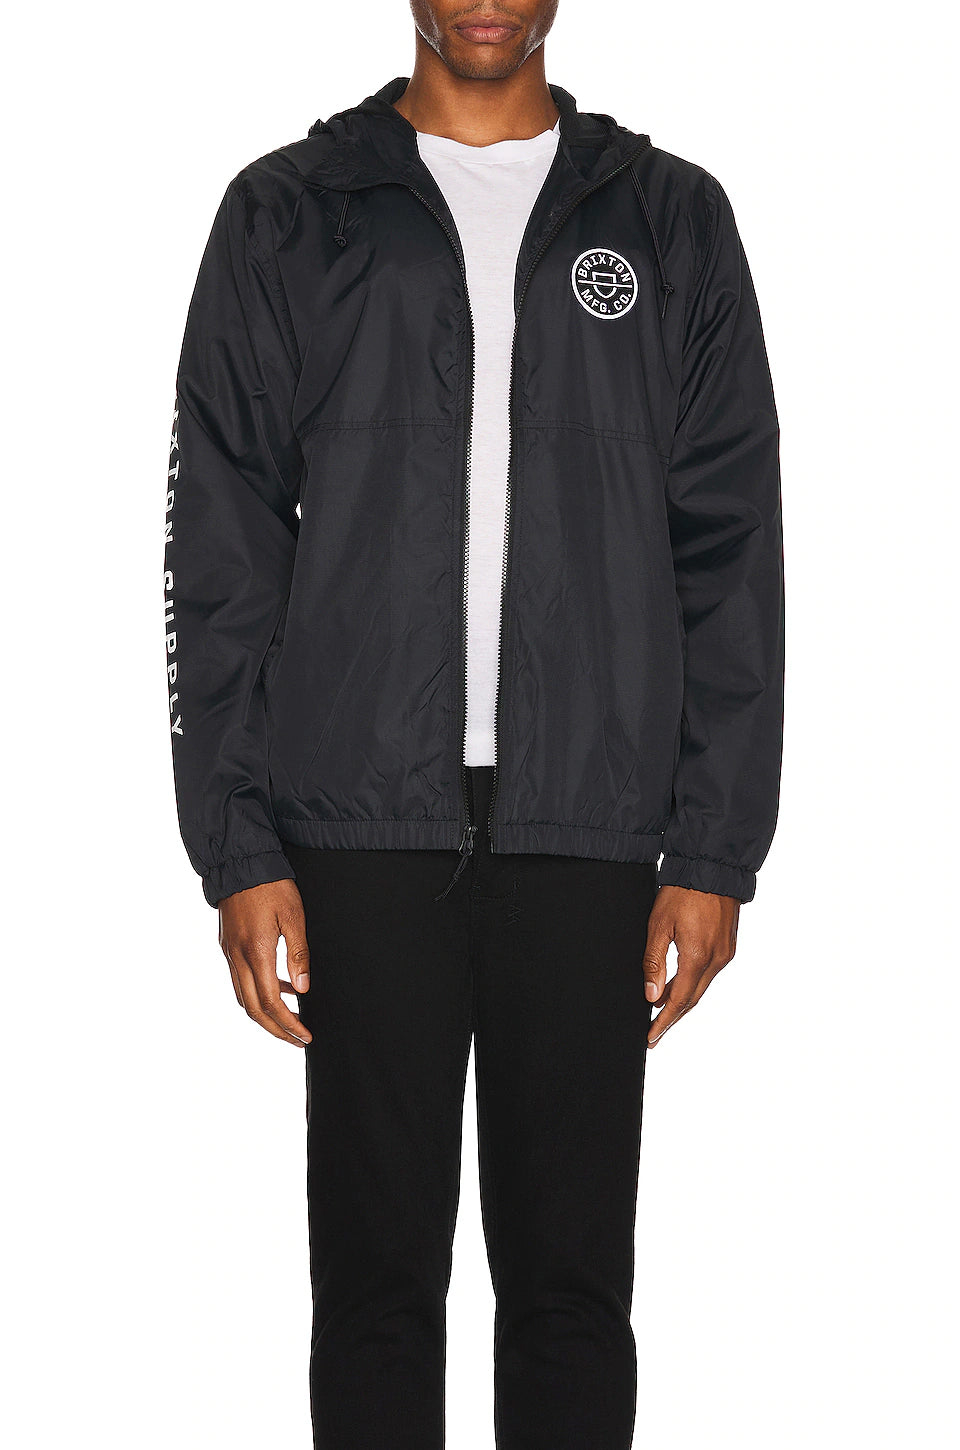 Claxton Crest Lined Hood Jacket